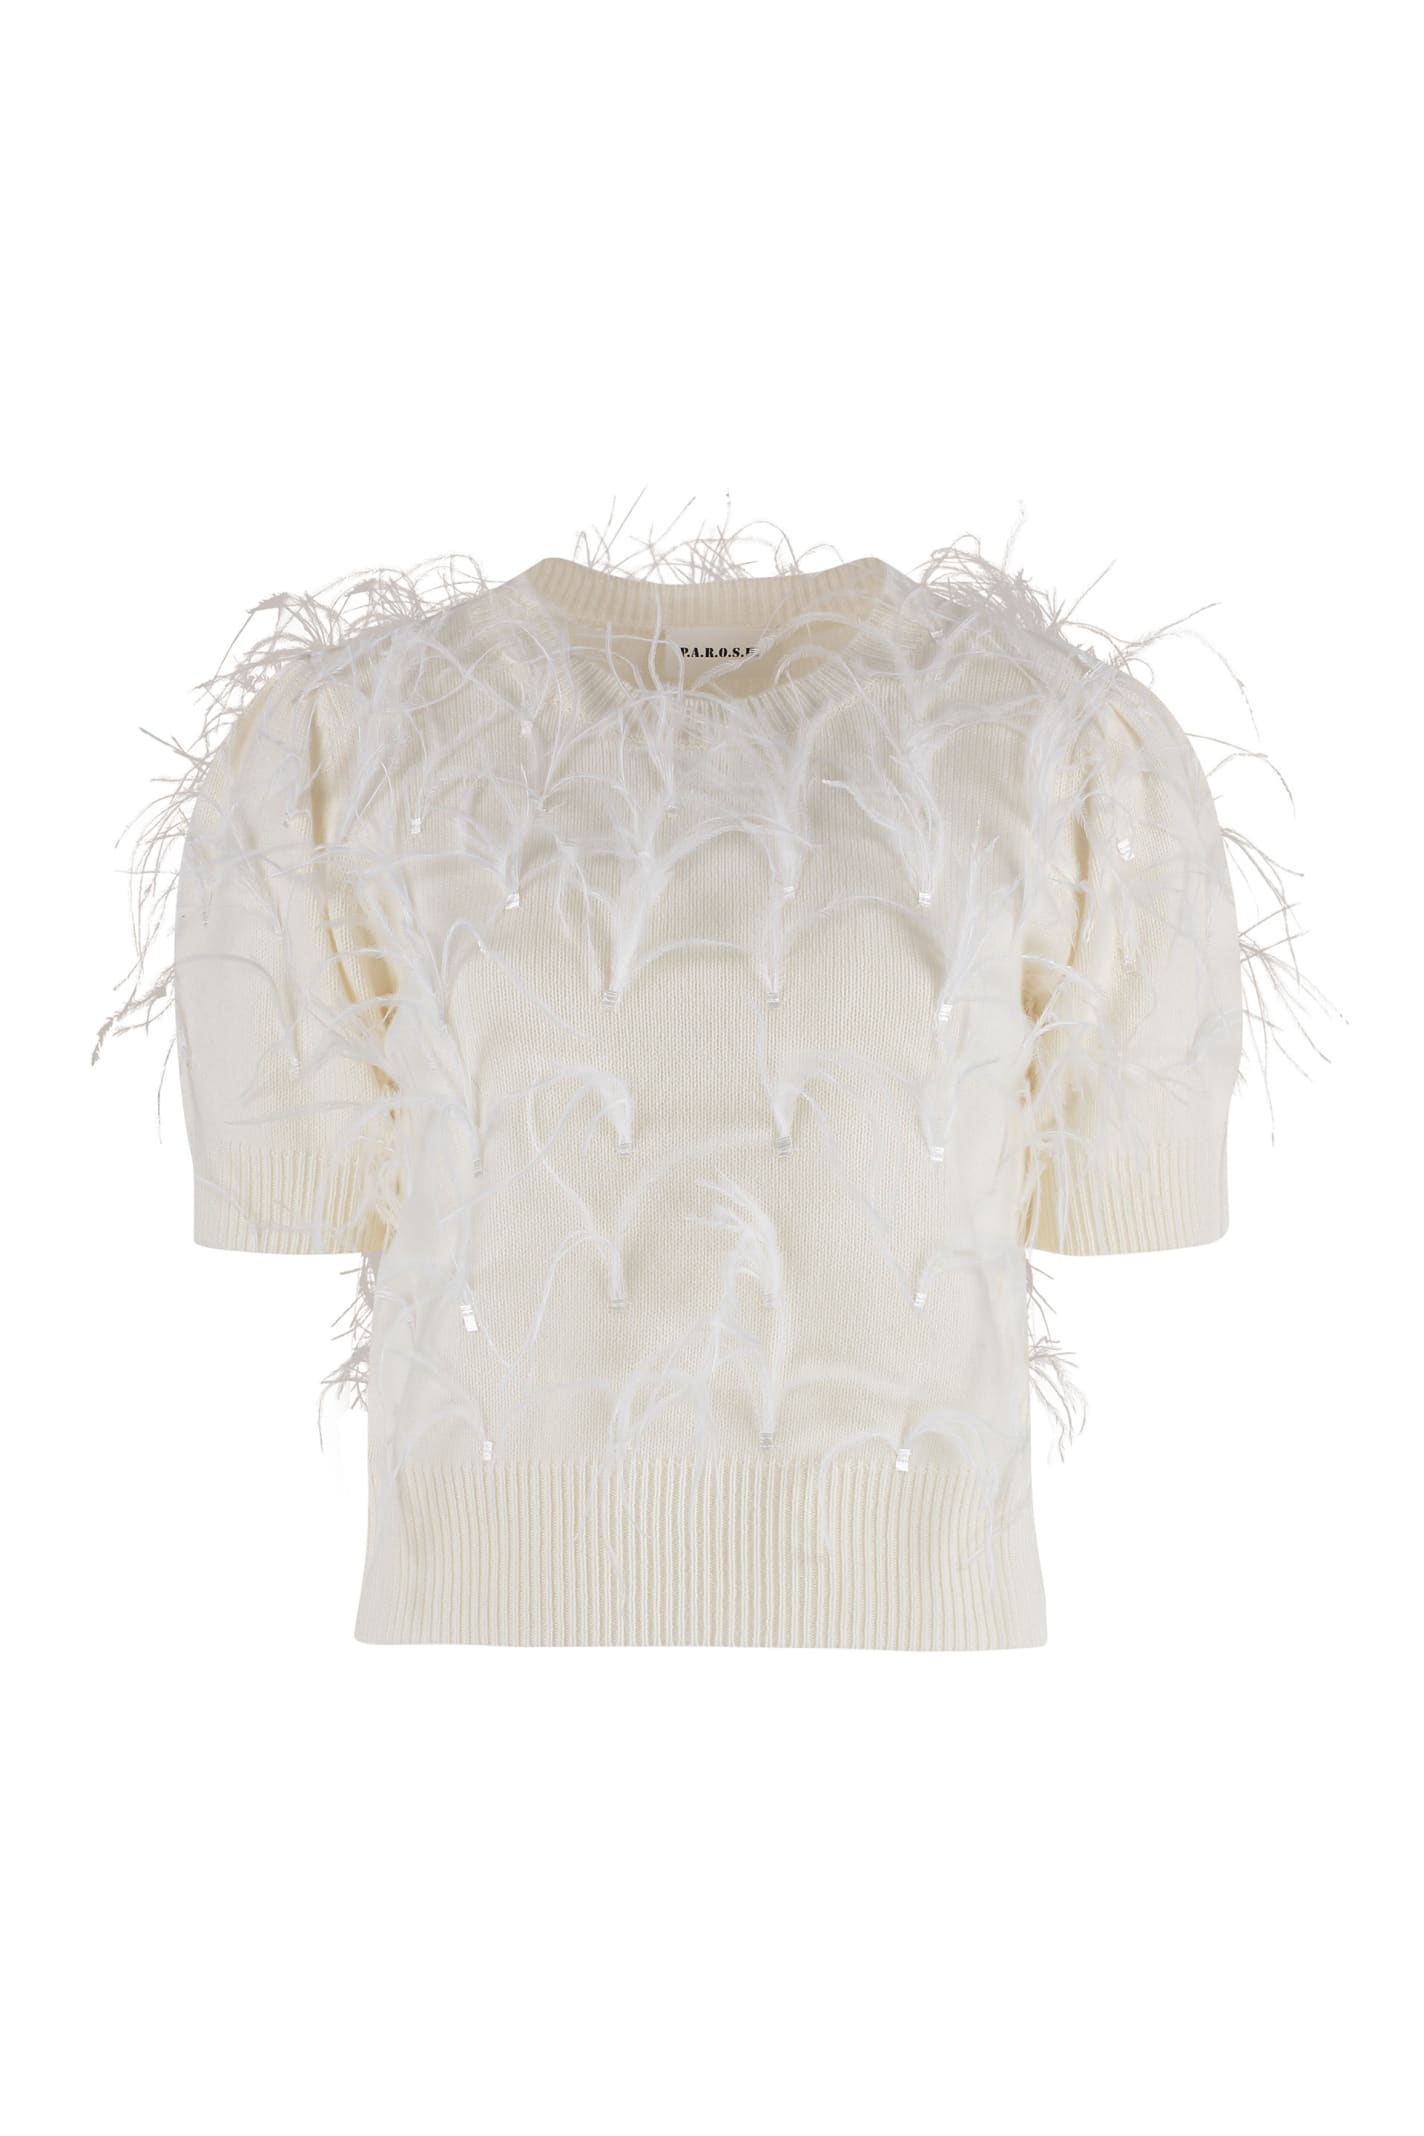 Parosh Lucy Ostrich Feathers Sweater